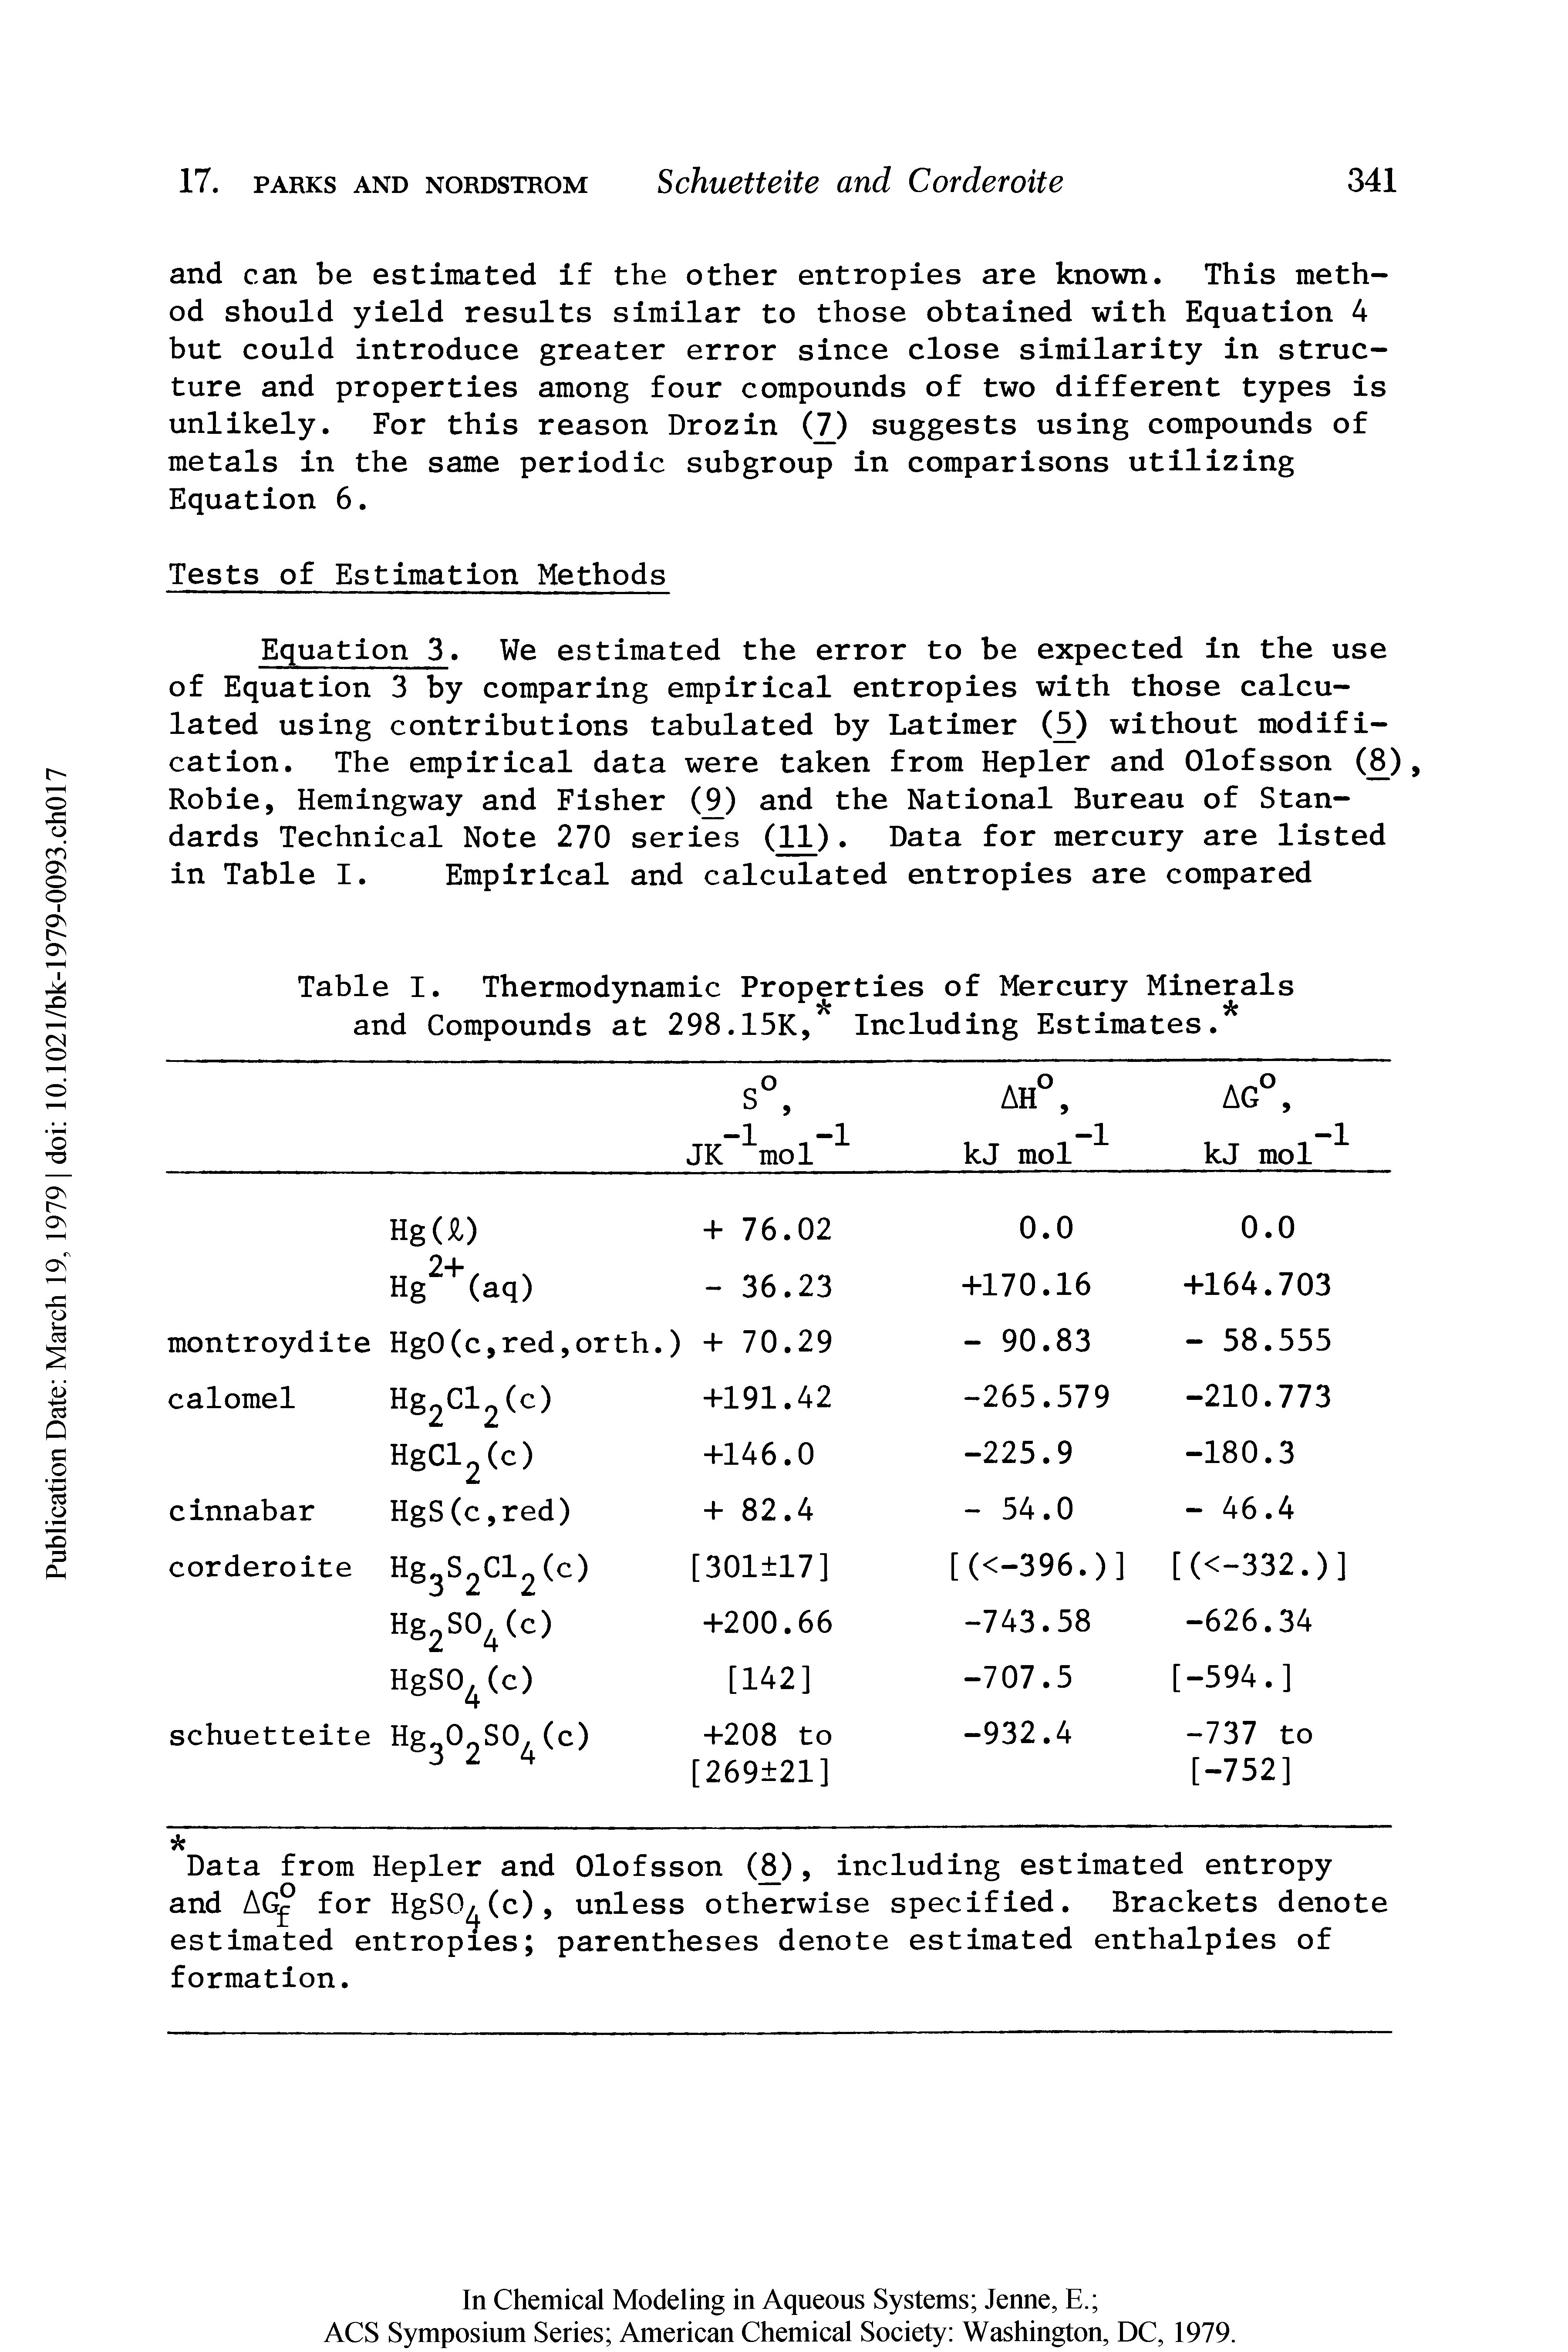 Table I. Thermodynamic Properties of Mercury Minerals and Compounds at 298.15K, Including Estimates.